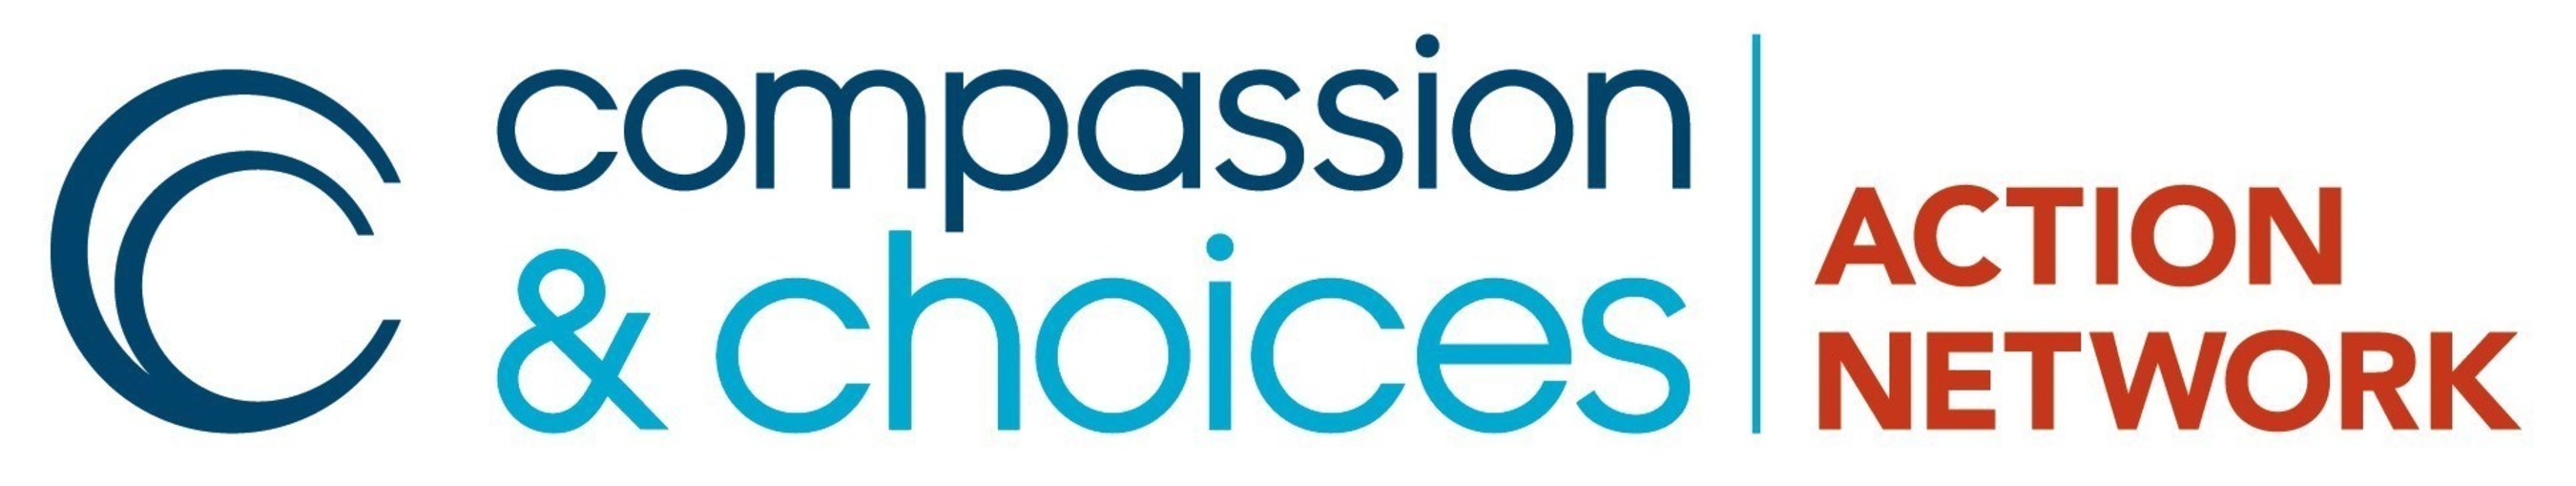 Compassion & Choices Action Network Logo